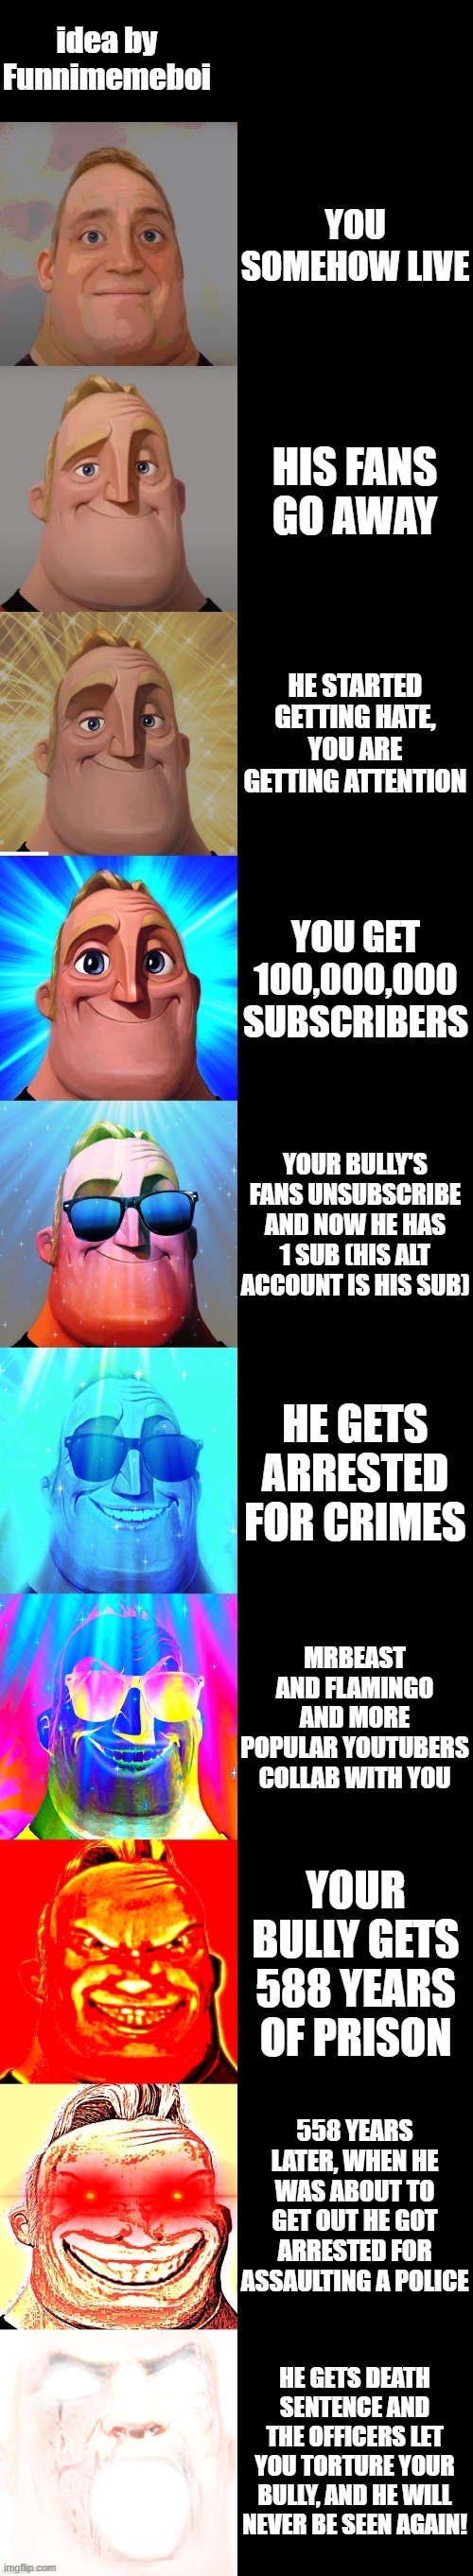 Pt 2. You get revenge on your bully | idea by Funnimemeboi; YOU SOMEHOW LIVE; HIS FANS GO AWAY; HE STARTED GETTING HATE, YOU ARE GETTING ATTENTION; YOU GET 100,000,000 SUBSCRIBERS; YOUR BULLY'S FANS UNSUBSCRIBE AND NOW HE HAS 1 SUB (HIS ALT ACCOUNT IS HIS SUB); HE GETS ARRESTED FOR CRIMES; MRBEAST AND FLAMINGO AND MORE POPULAR YOUTUBERS COLLAB WITH YOU; YOUR BULLY GETS 588 YEARS OF PRISON; 558 YEARS LATER, WHEN HE WAS ABOUT TO GET OUT HE GOT ARRESTED FOR ASSAULTING A POLICE; HE GETS DEATH SENTENCE AND THE OFFICERS LET YOU TORTURE YOUR BULLY, AND HE WILL NEVER BE SEEN AGAIN! | image tagged in mr incredible becoming canny,funny | made w/ Imgflip meme maker